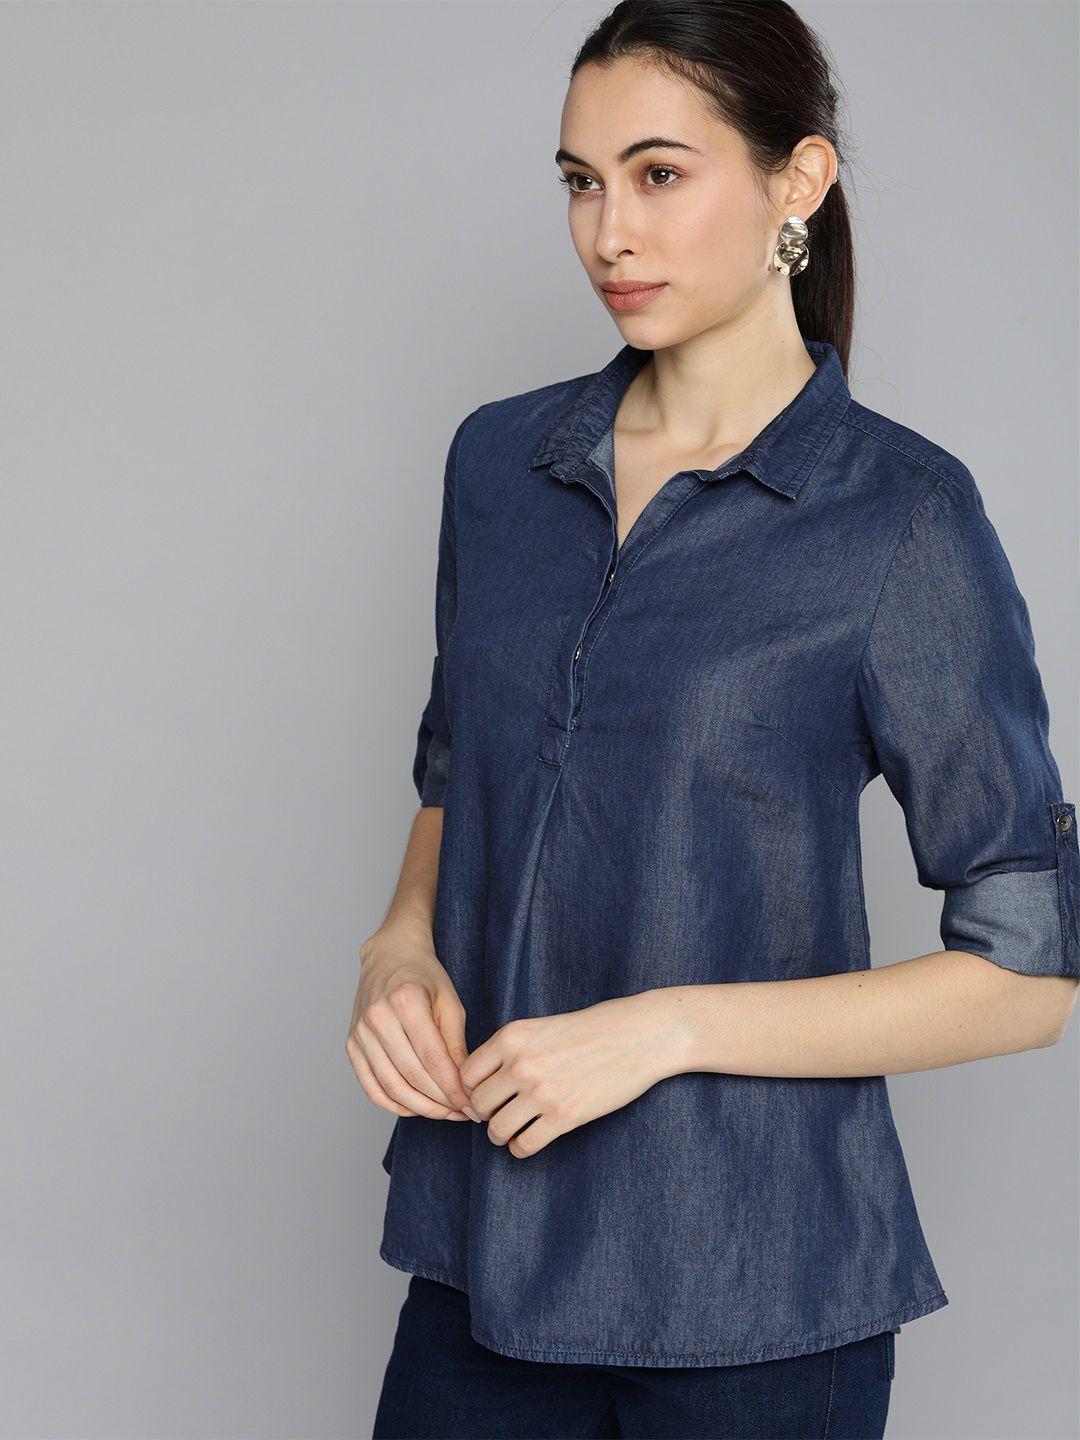 chemistry women blue solid denim roll-up sleeves shirt style top